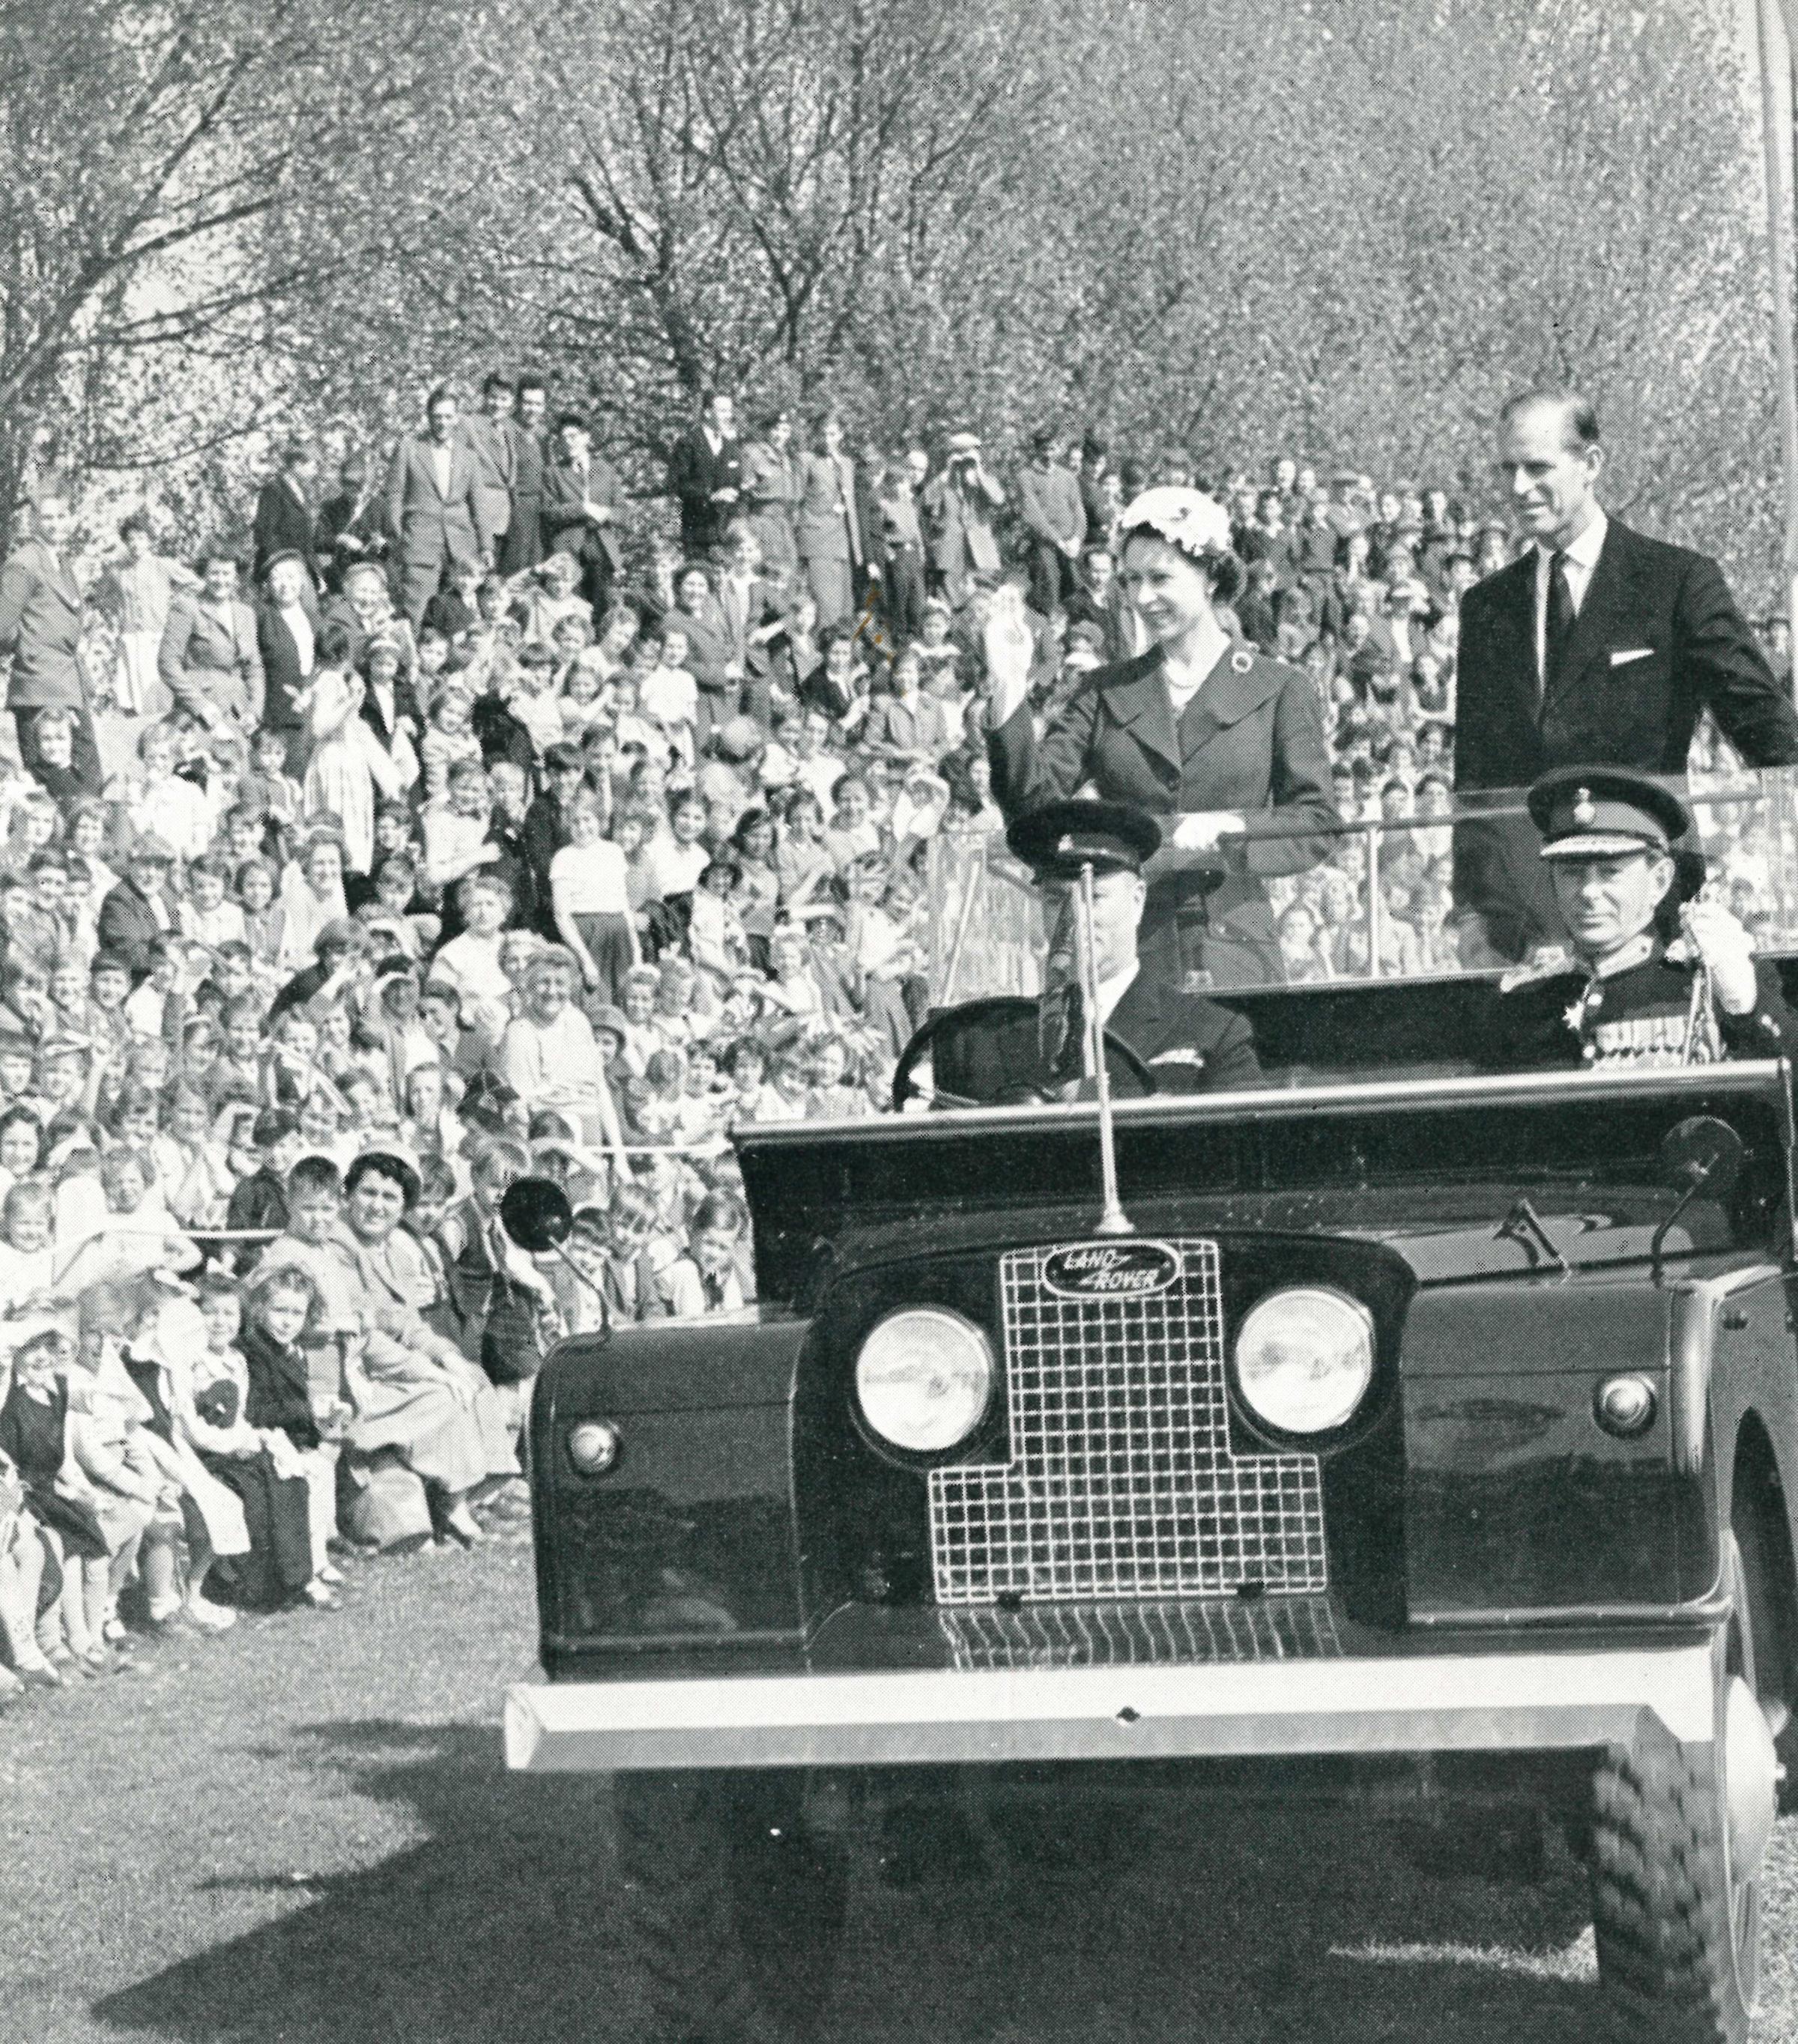 The Queen waves to crowds at Edgar Street Athletics Ground in 1957